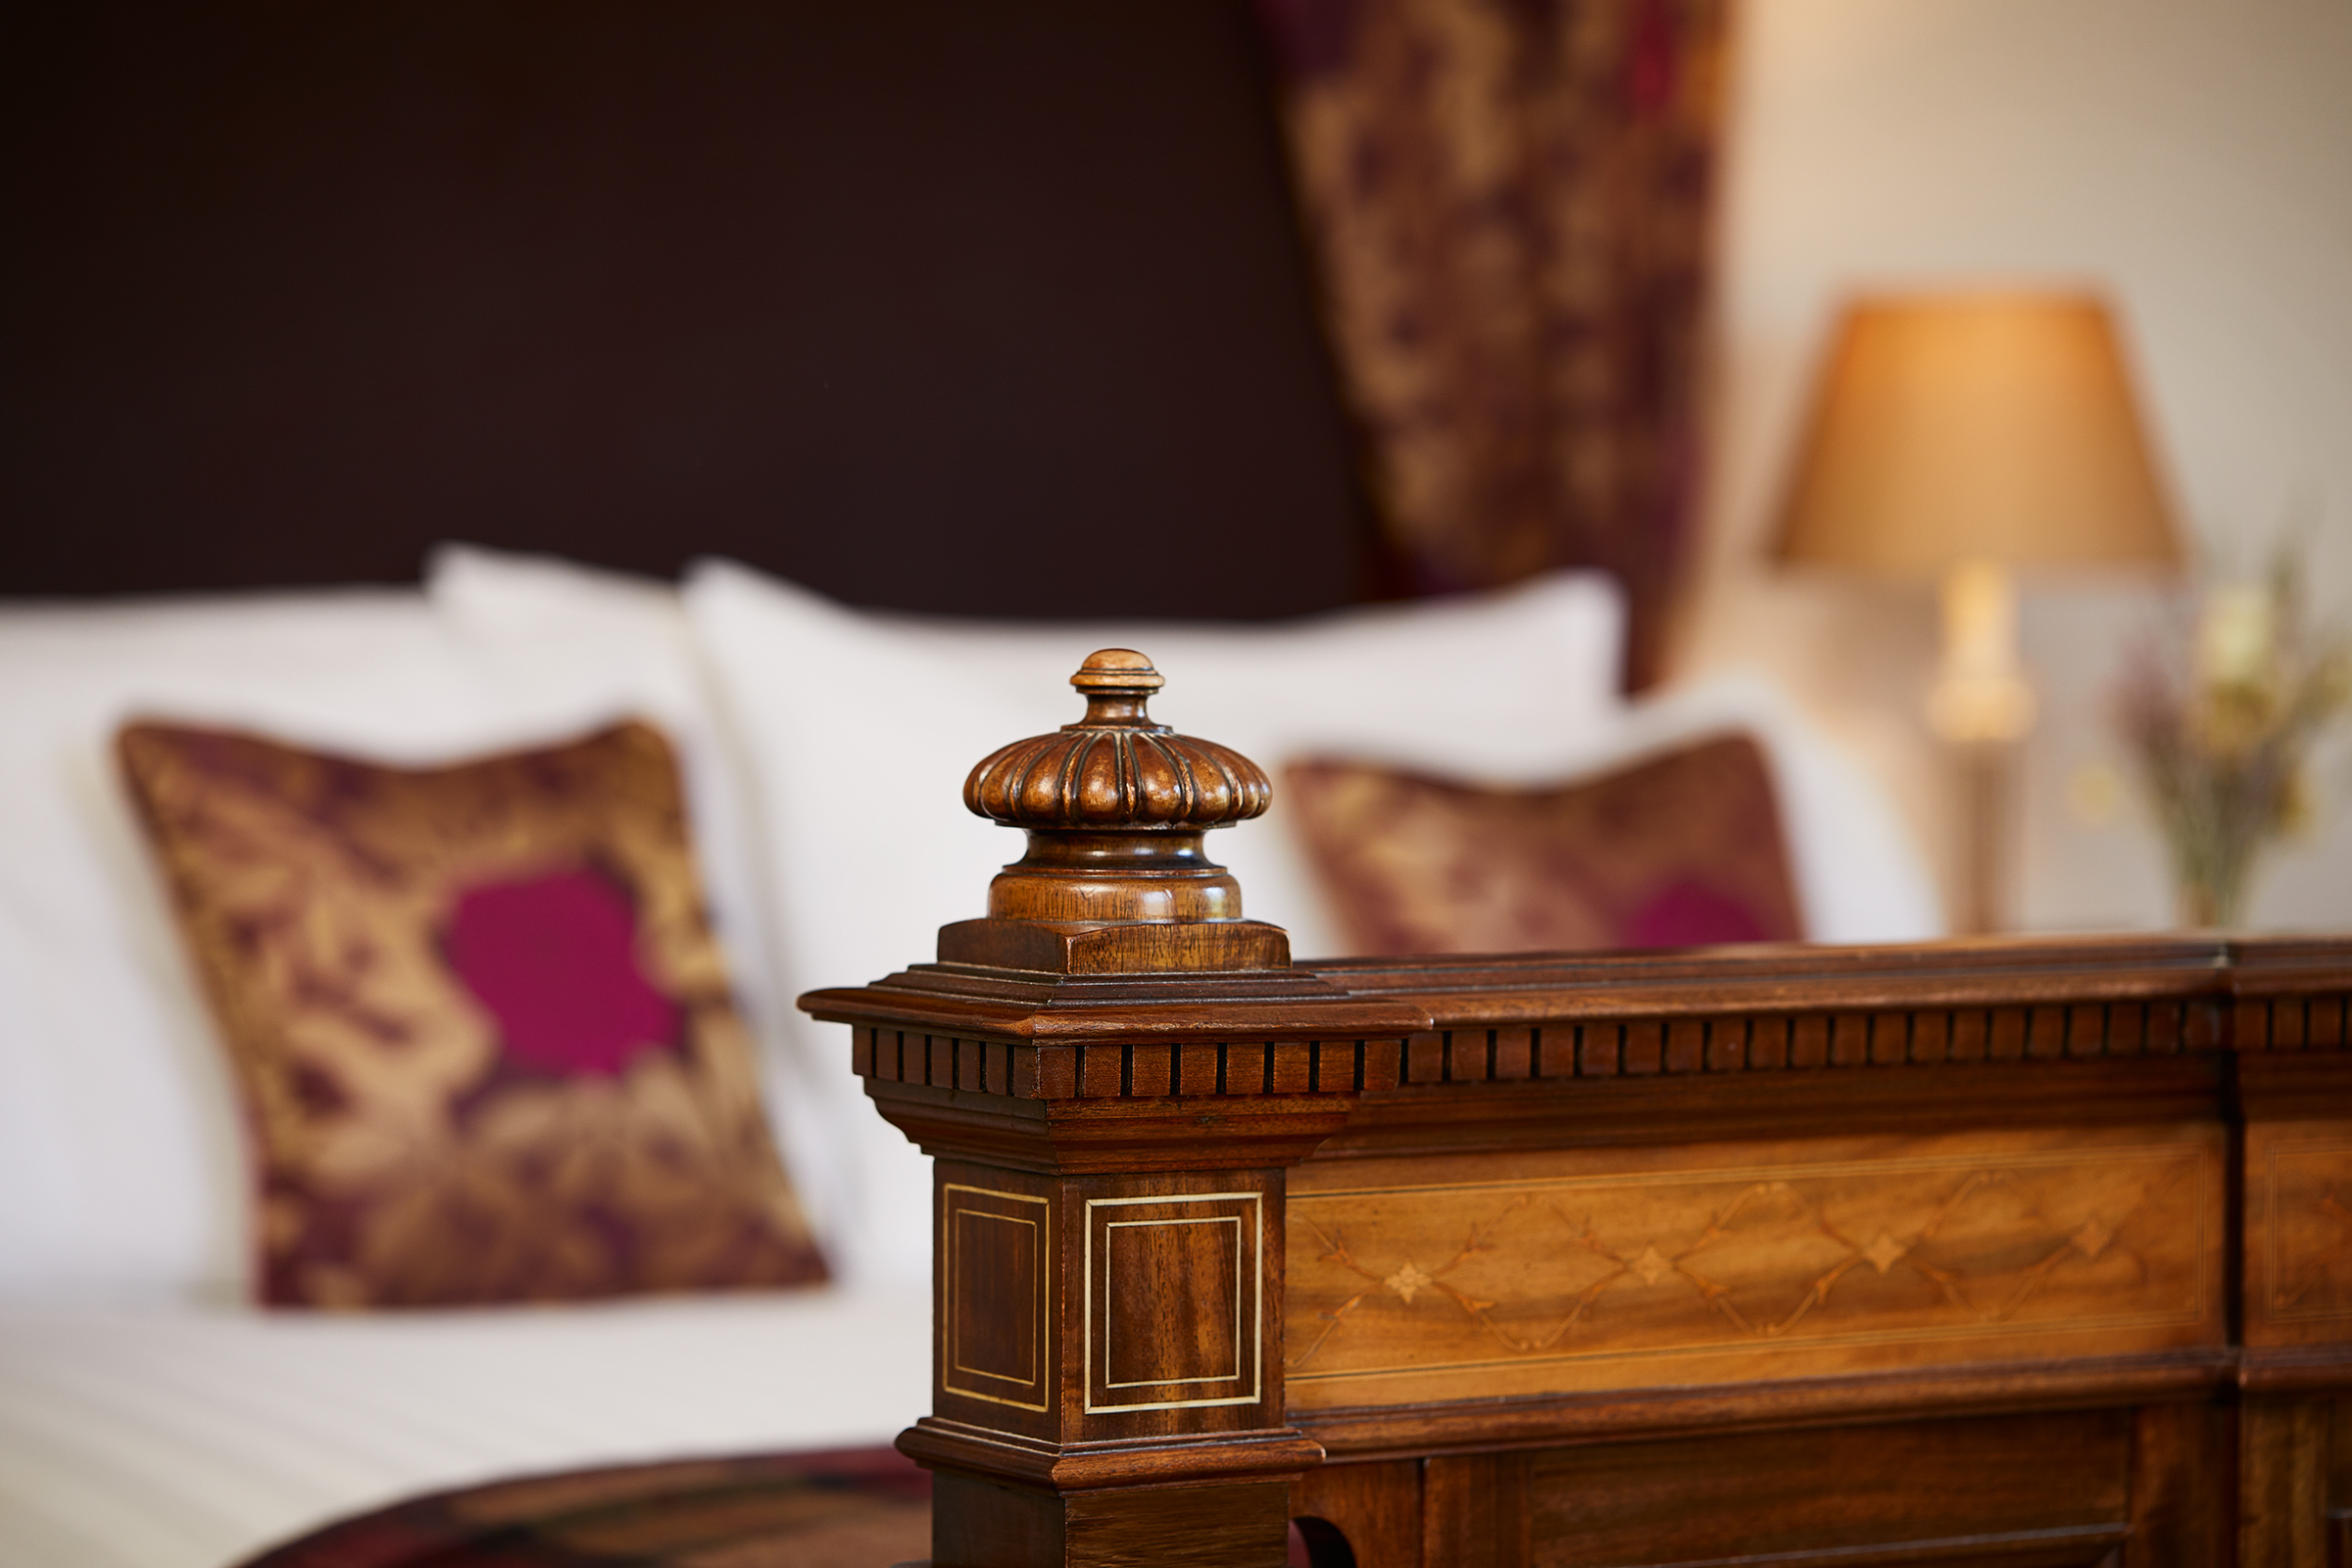 Bed Detail at Leeming House hotel, UK hospitality and lifestyle photography